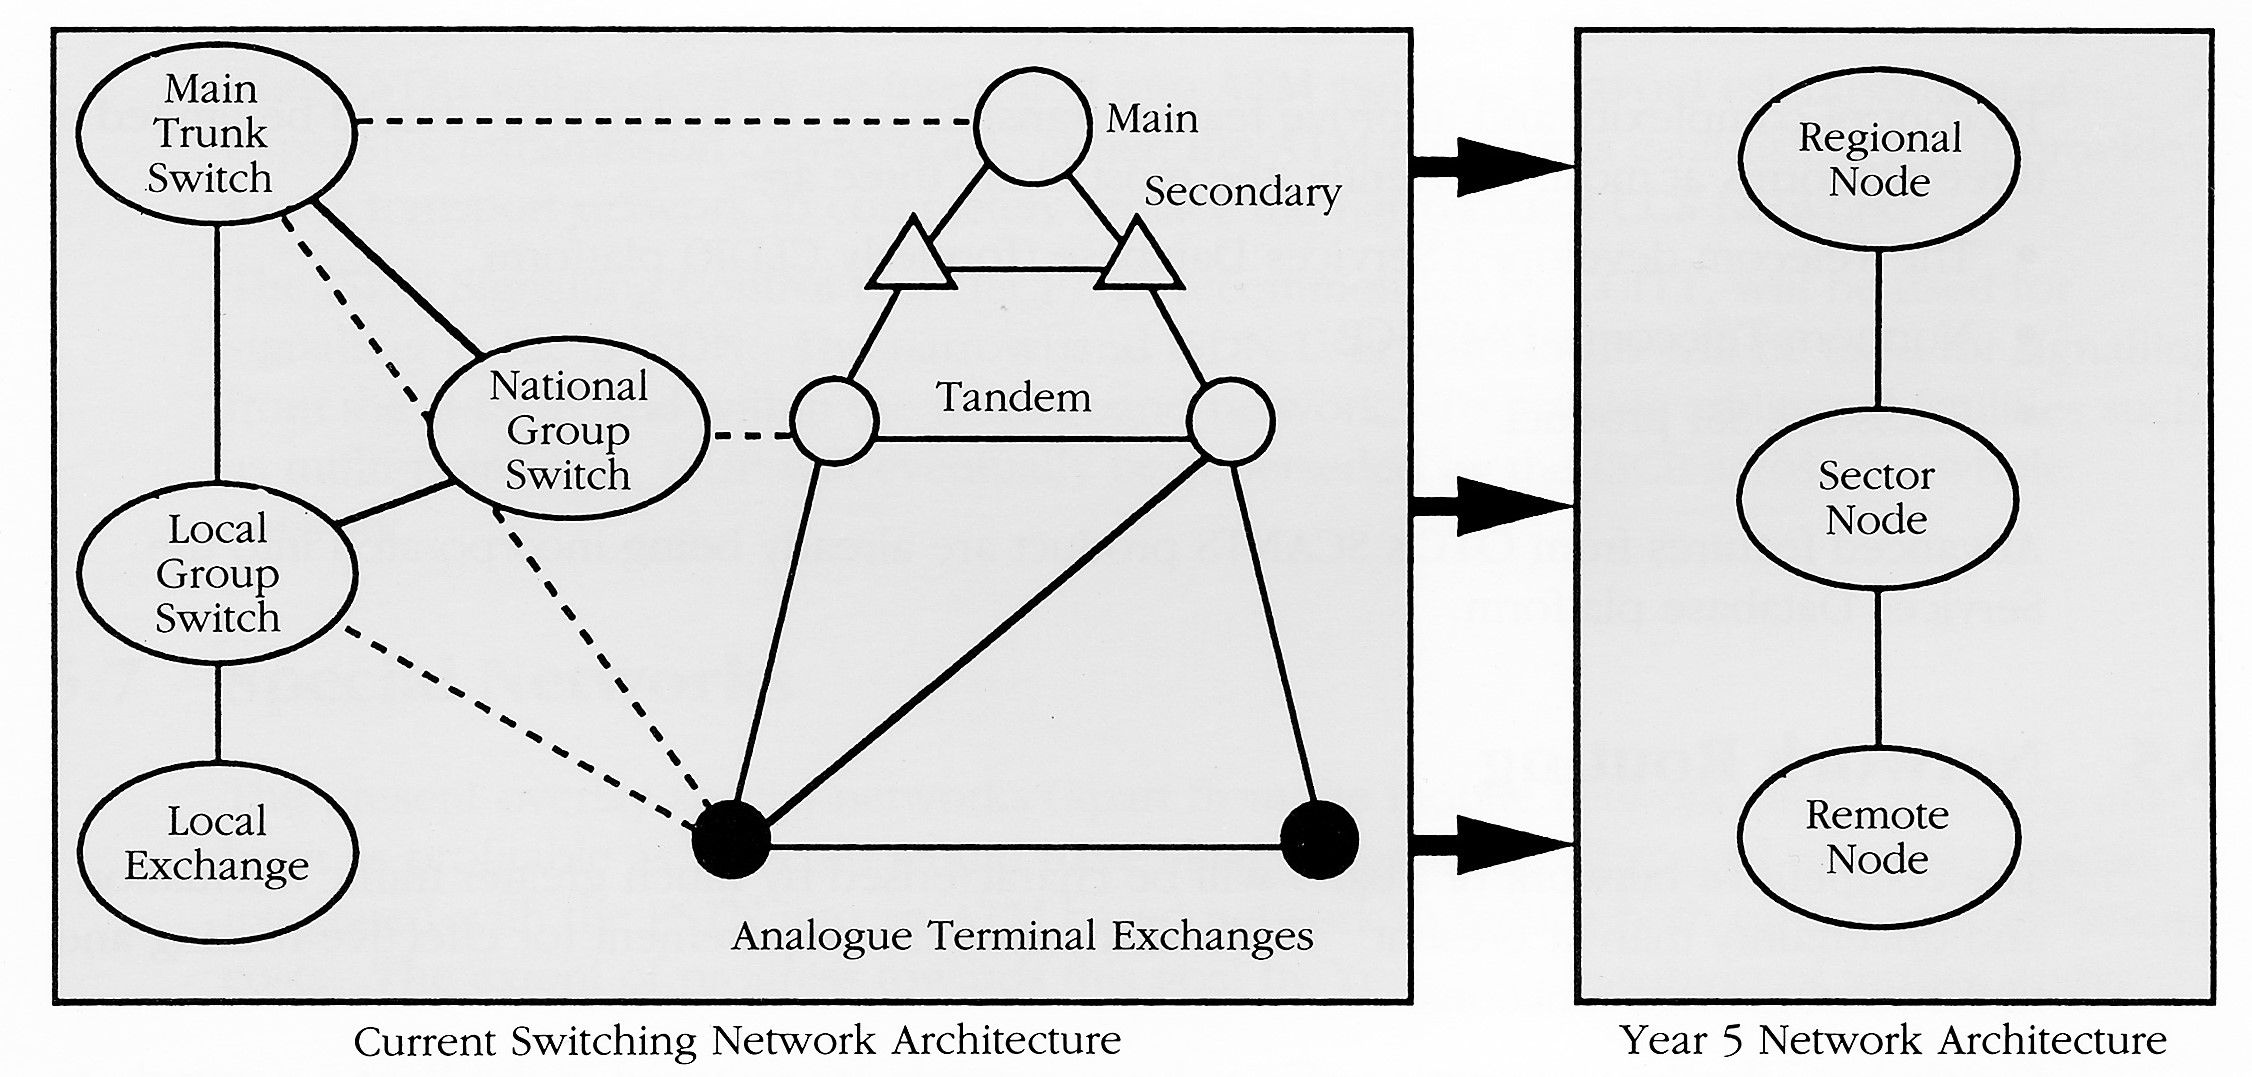 Figure 6. Changes in Switching Network Architecture - 1992 to 1997